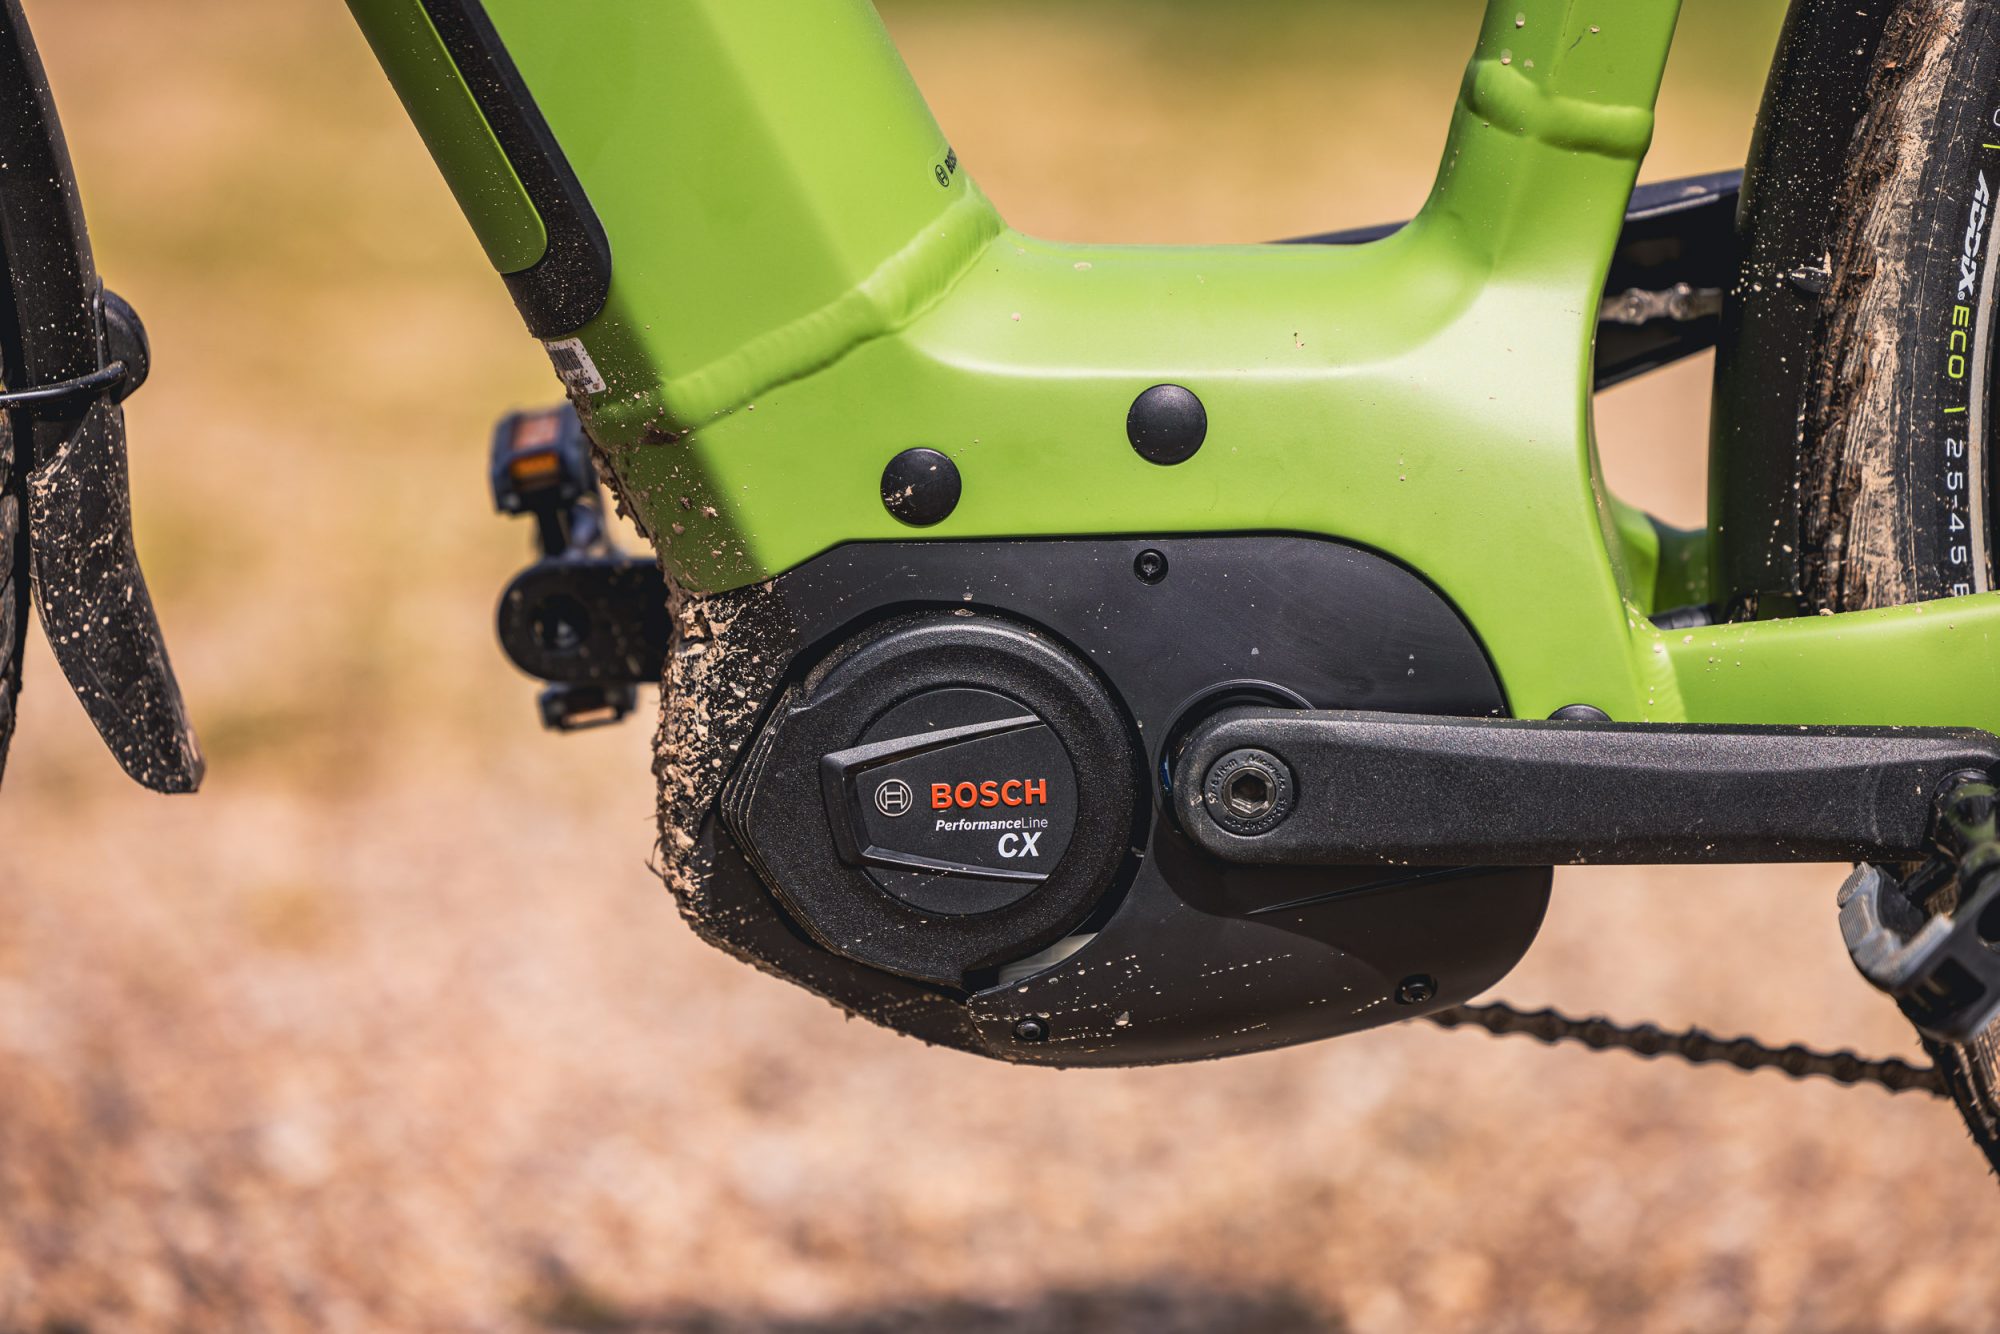 Our test bike is equipped with a powerful bosch performance line cx motor, which delivers an impressive 85 nm!